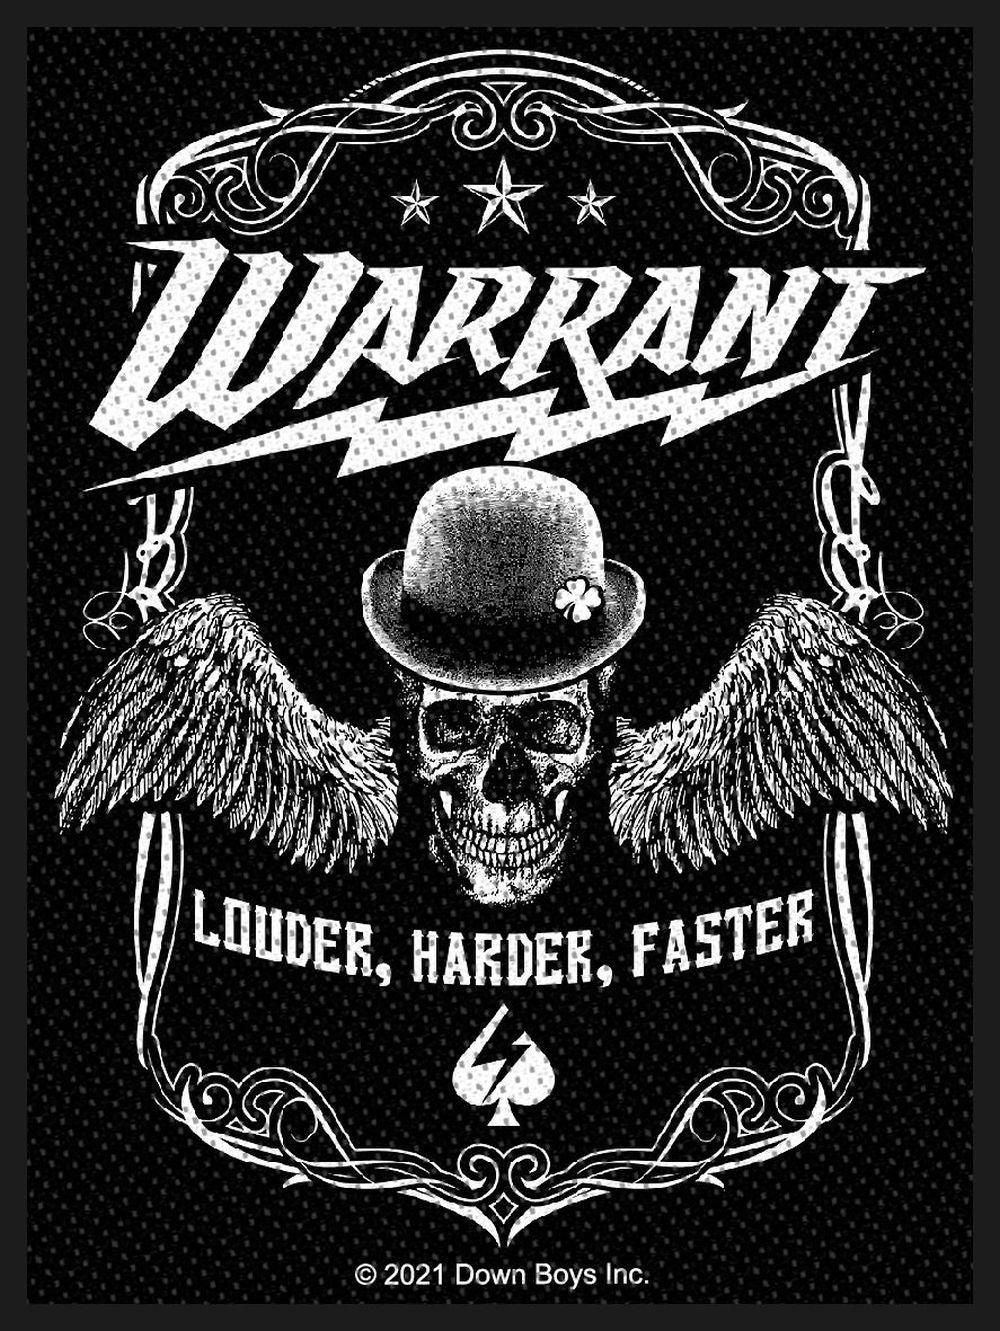 Warrant - Louder Harder Faster (100mm x 75mm) Sew-On Patch